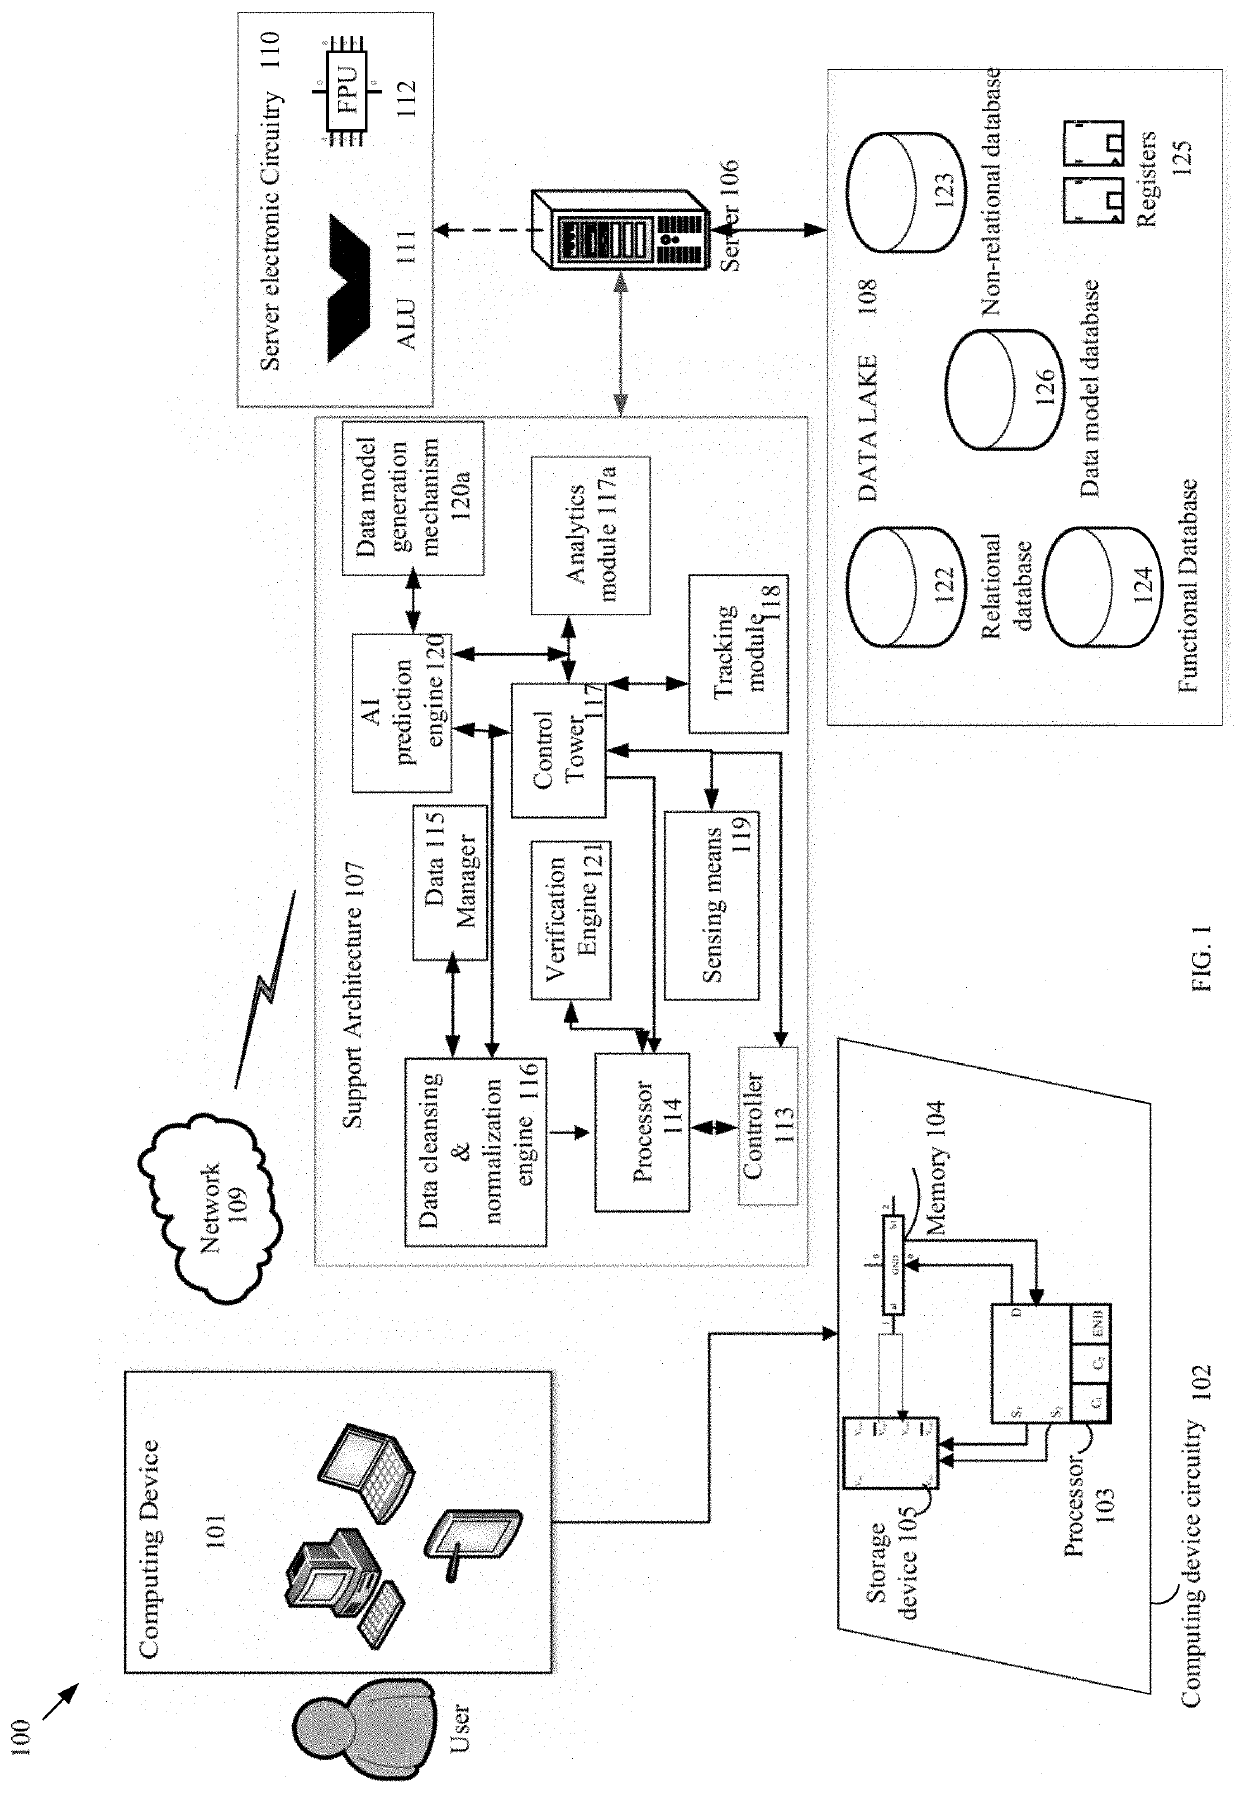 Self-driven system & method for operating enterprise and supply chain applications